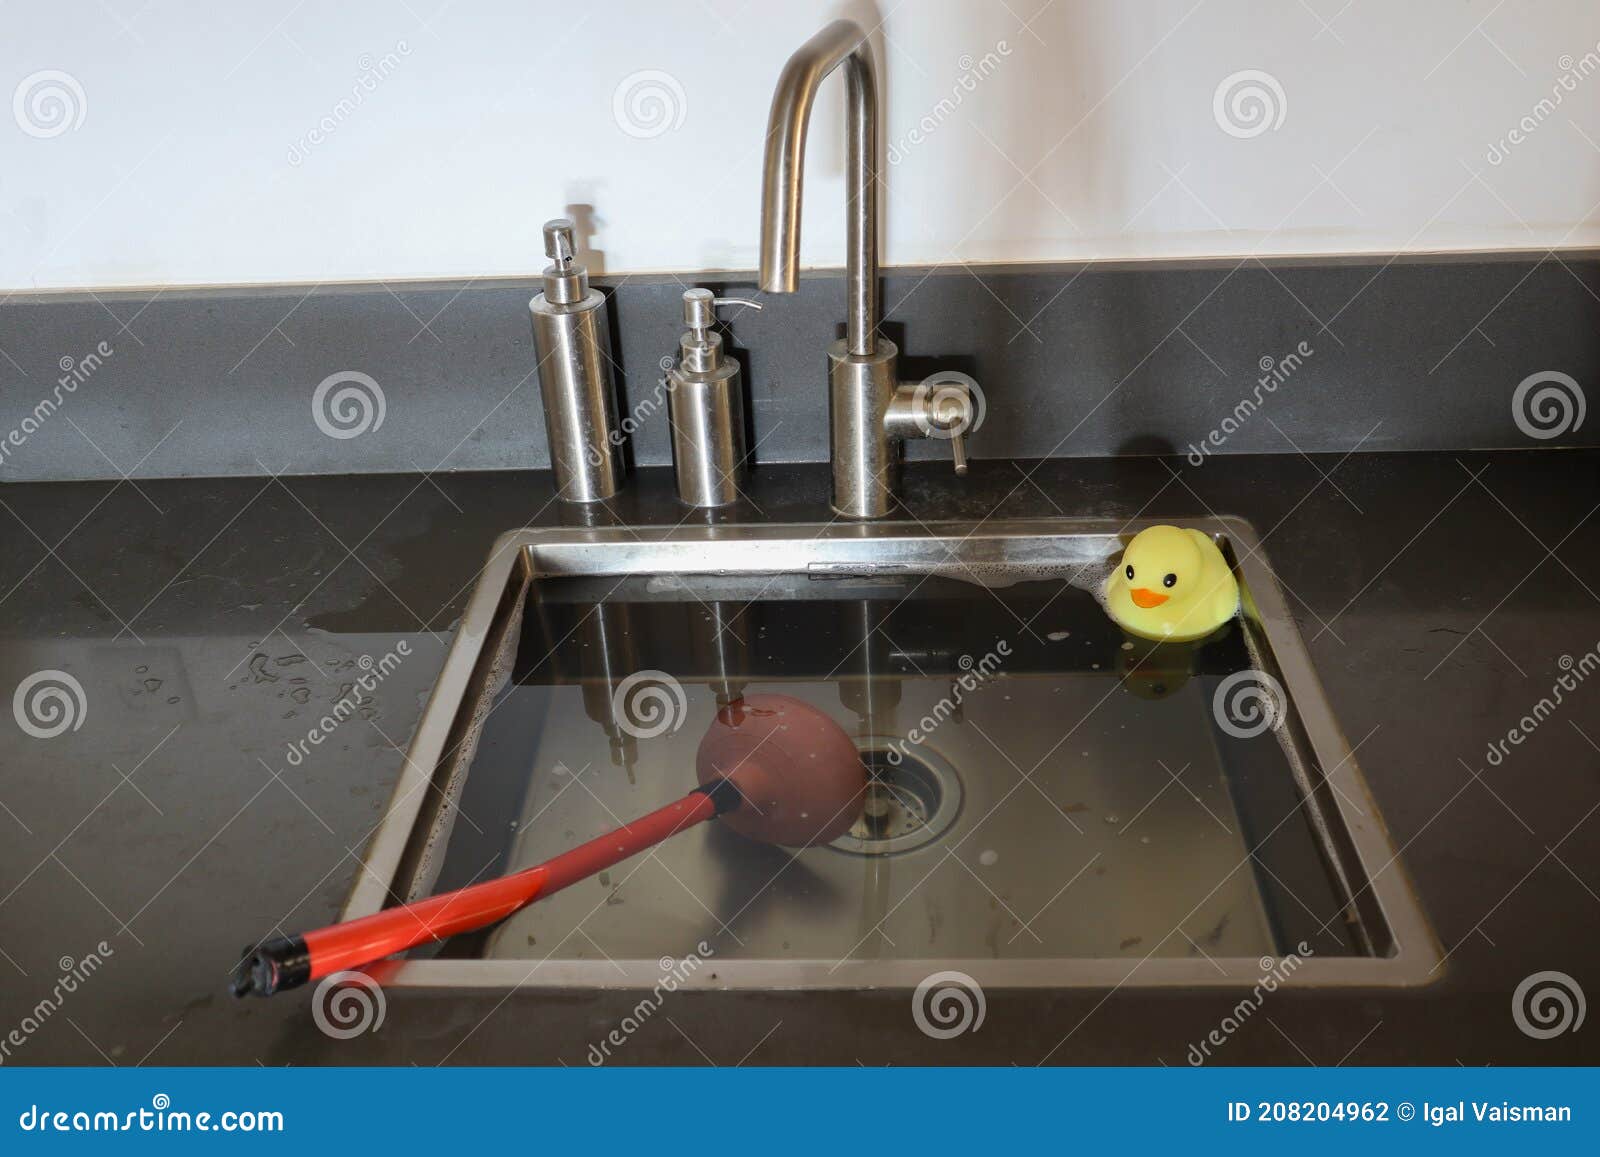 Happy Woman Looking At Male Plumber Using Plunger In The Kitchen Sink,  Stock Photo, Picture And Low Budget Royalty Free Image. Pic. ESY-048550729